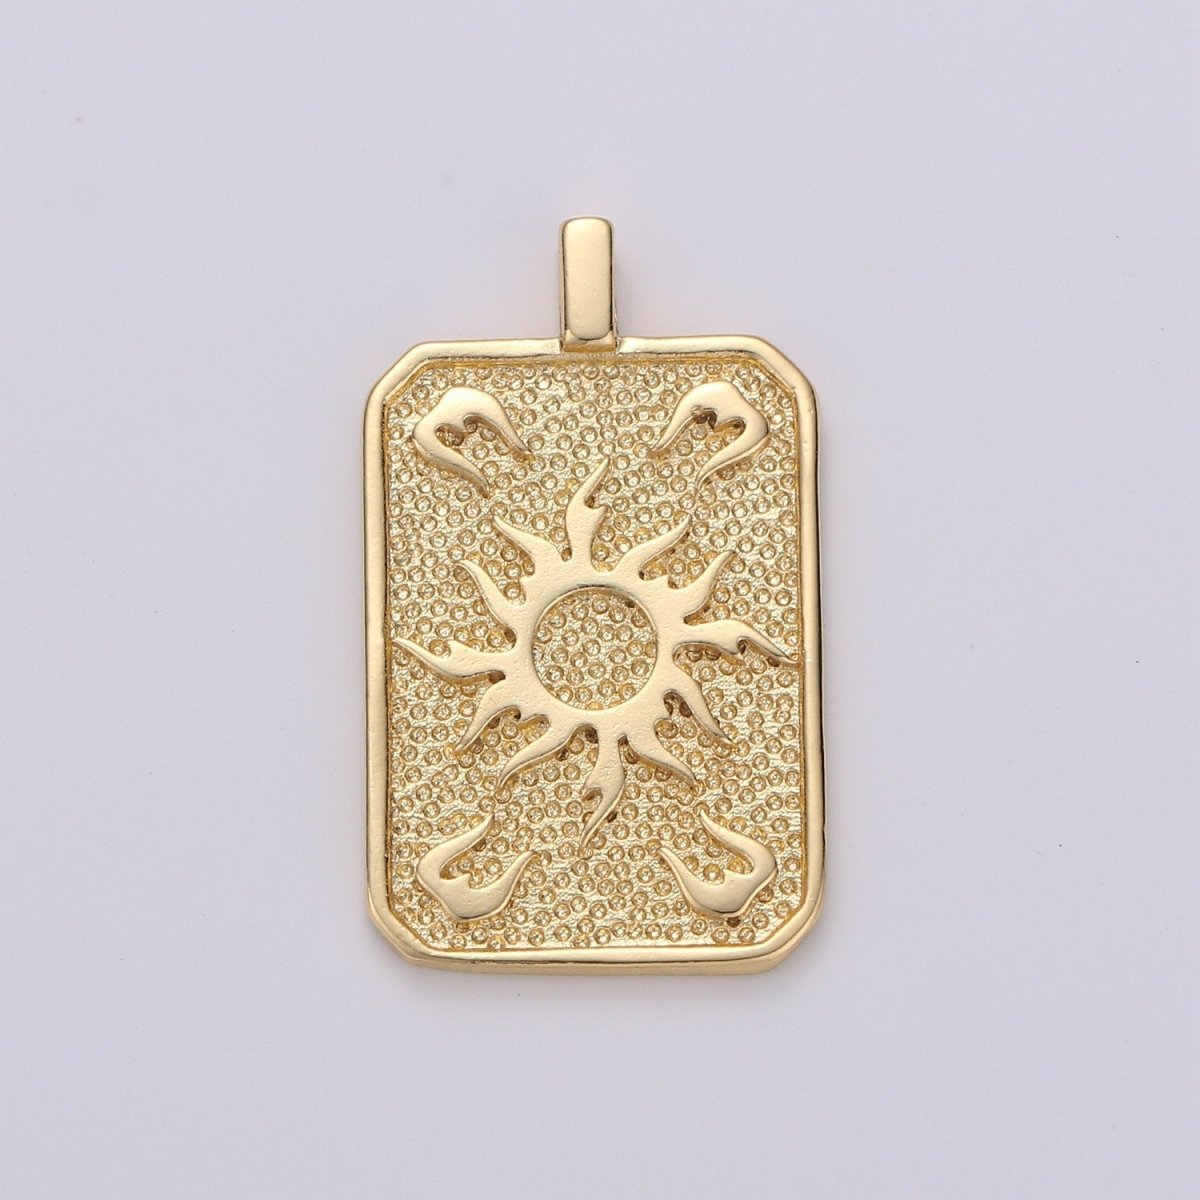 Gold Sun Charm Gold Filled Medallion, Celestial Pendant Necklace Charm for Statement Necklace Component Gold Tag Unisex Jewelry J-031 - DLUXCA